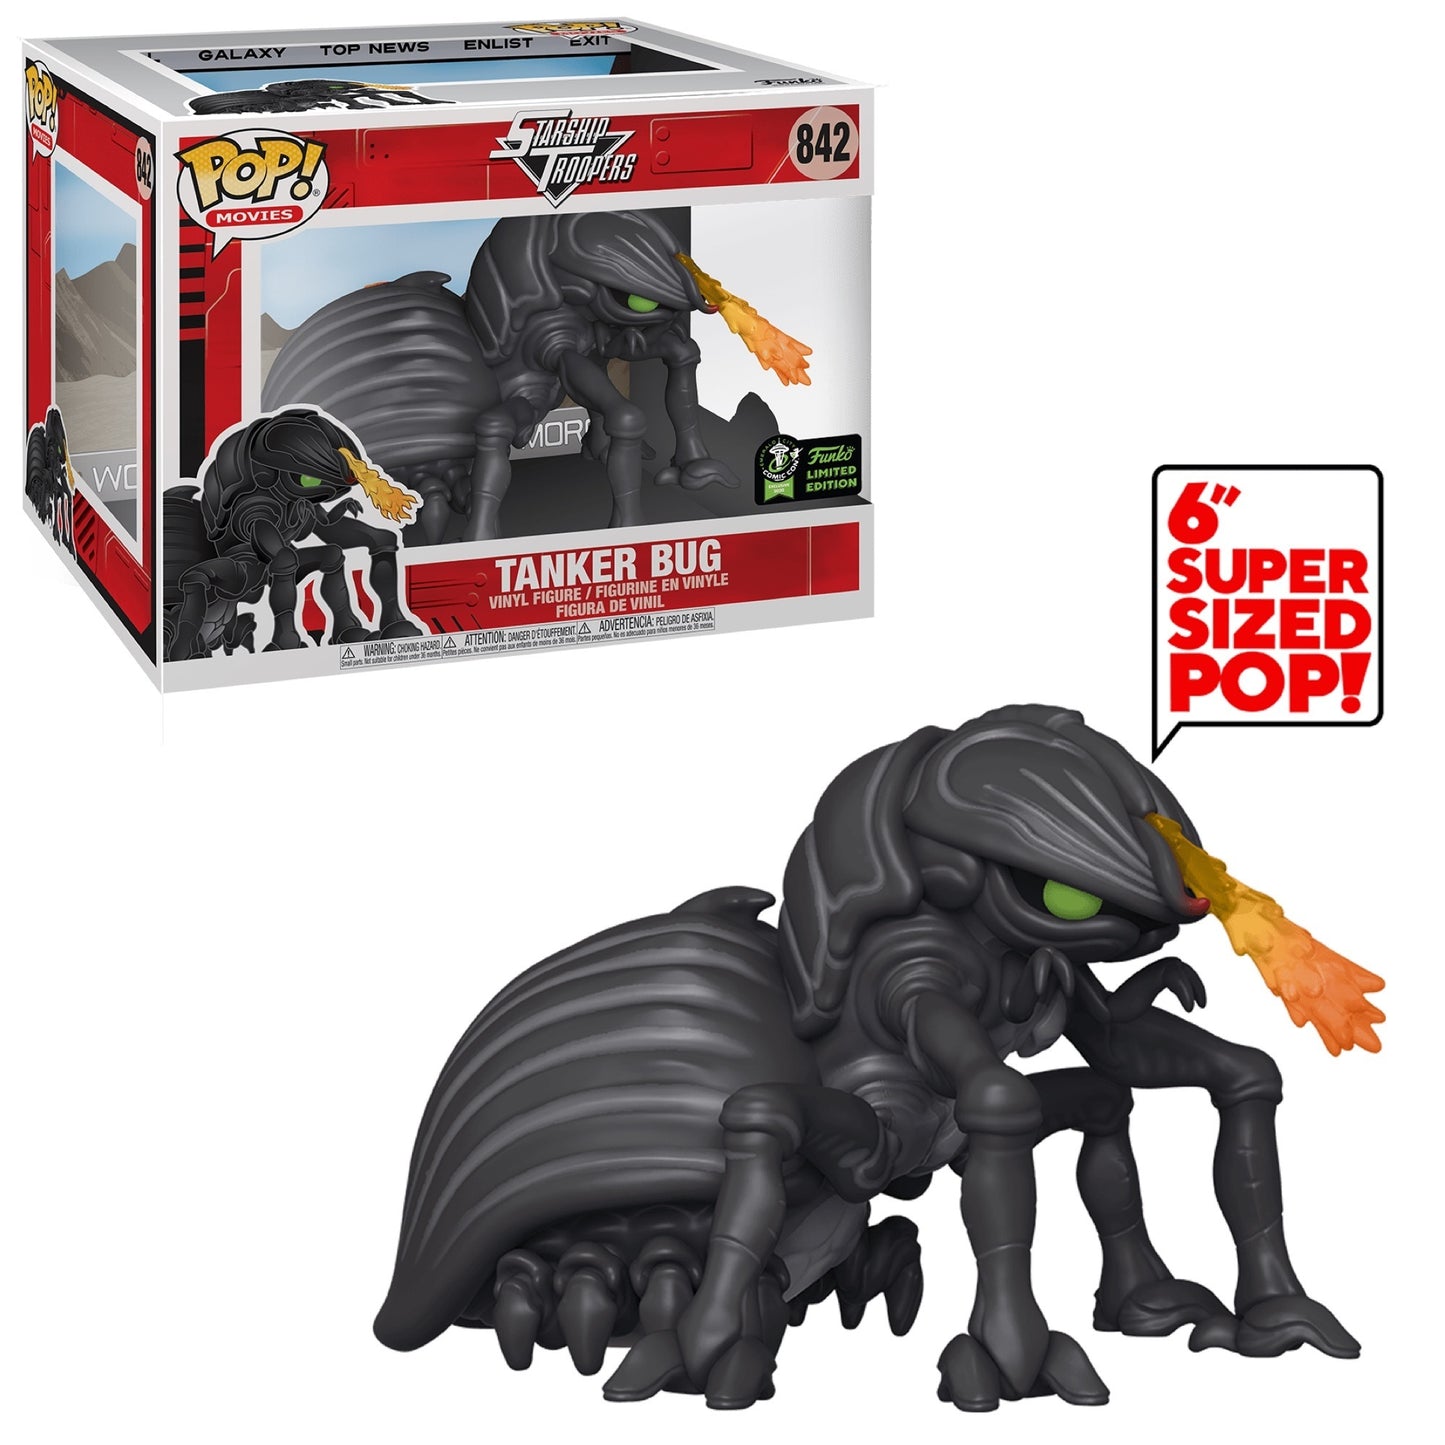 Funko POP! Movies Starship Troopers 6 Inch Tanker Bug #842 ECCC (Convention Sticker Exclusive) Limited Edition